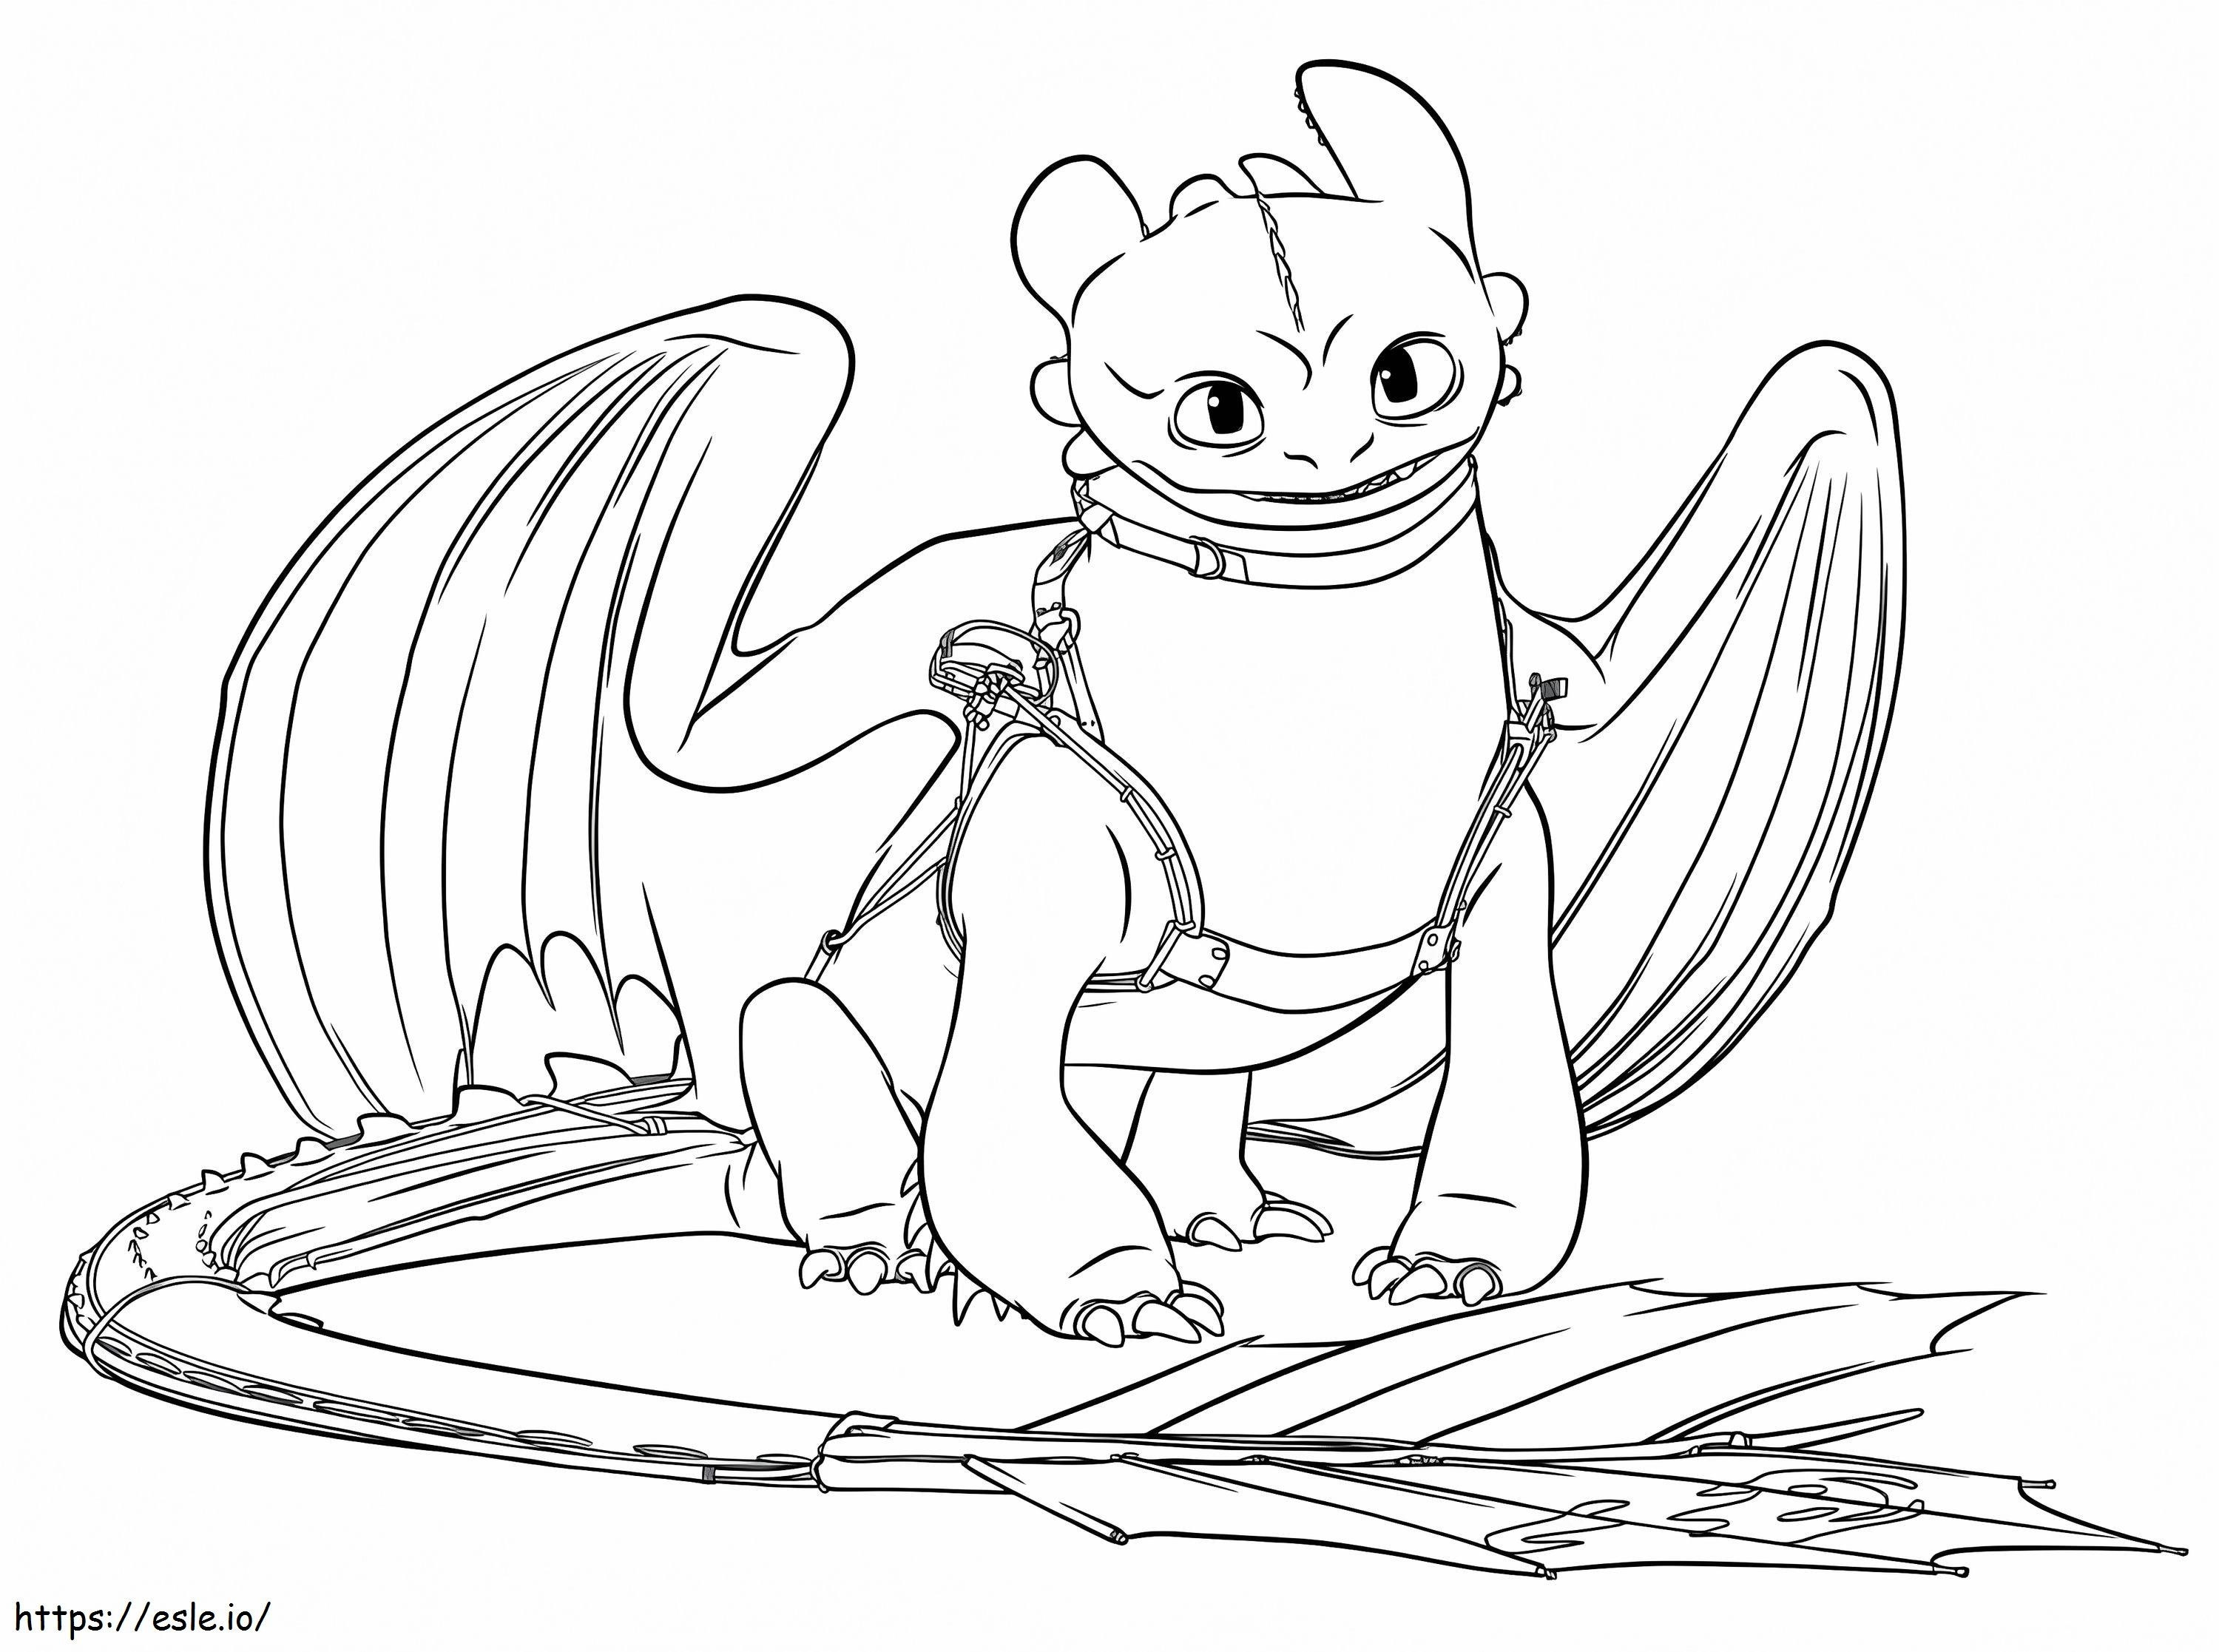 Cool Toothless coloring page